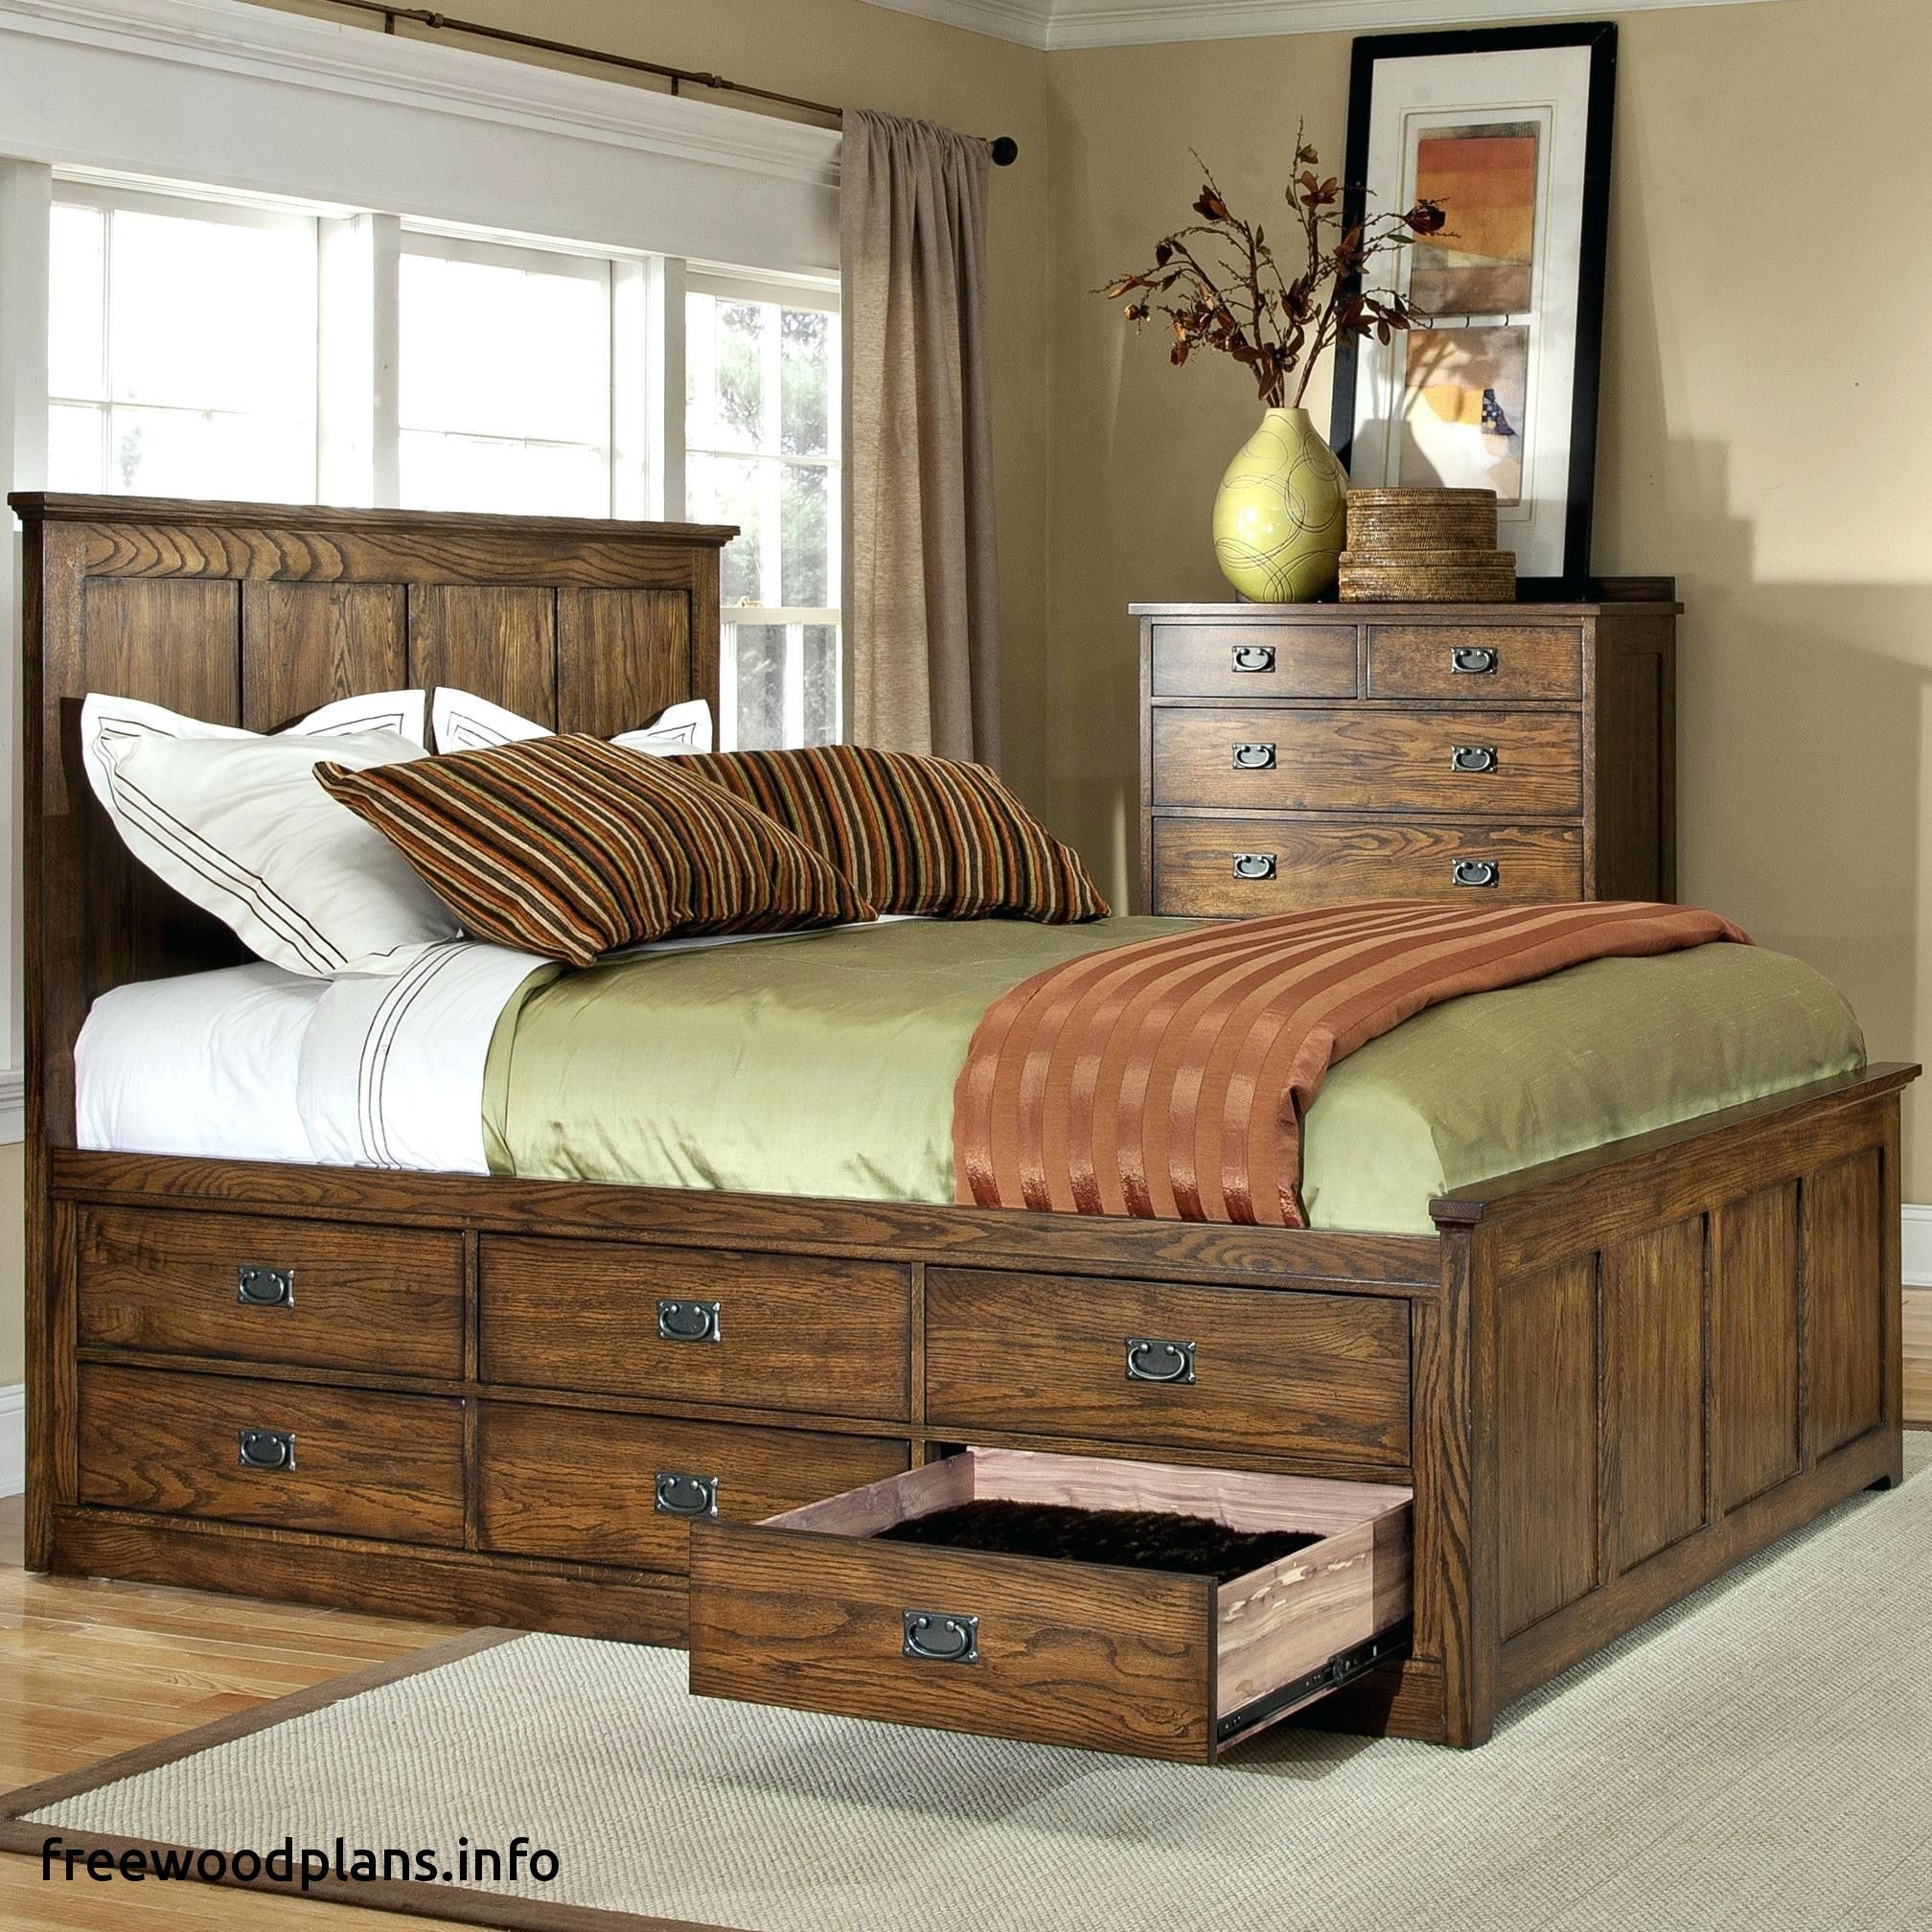 Storage Beds With Built in Drawers